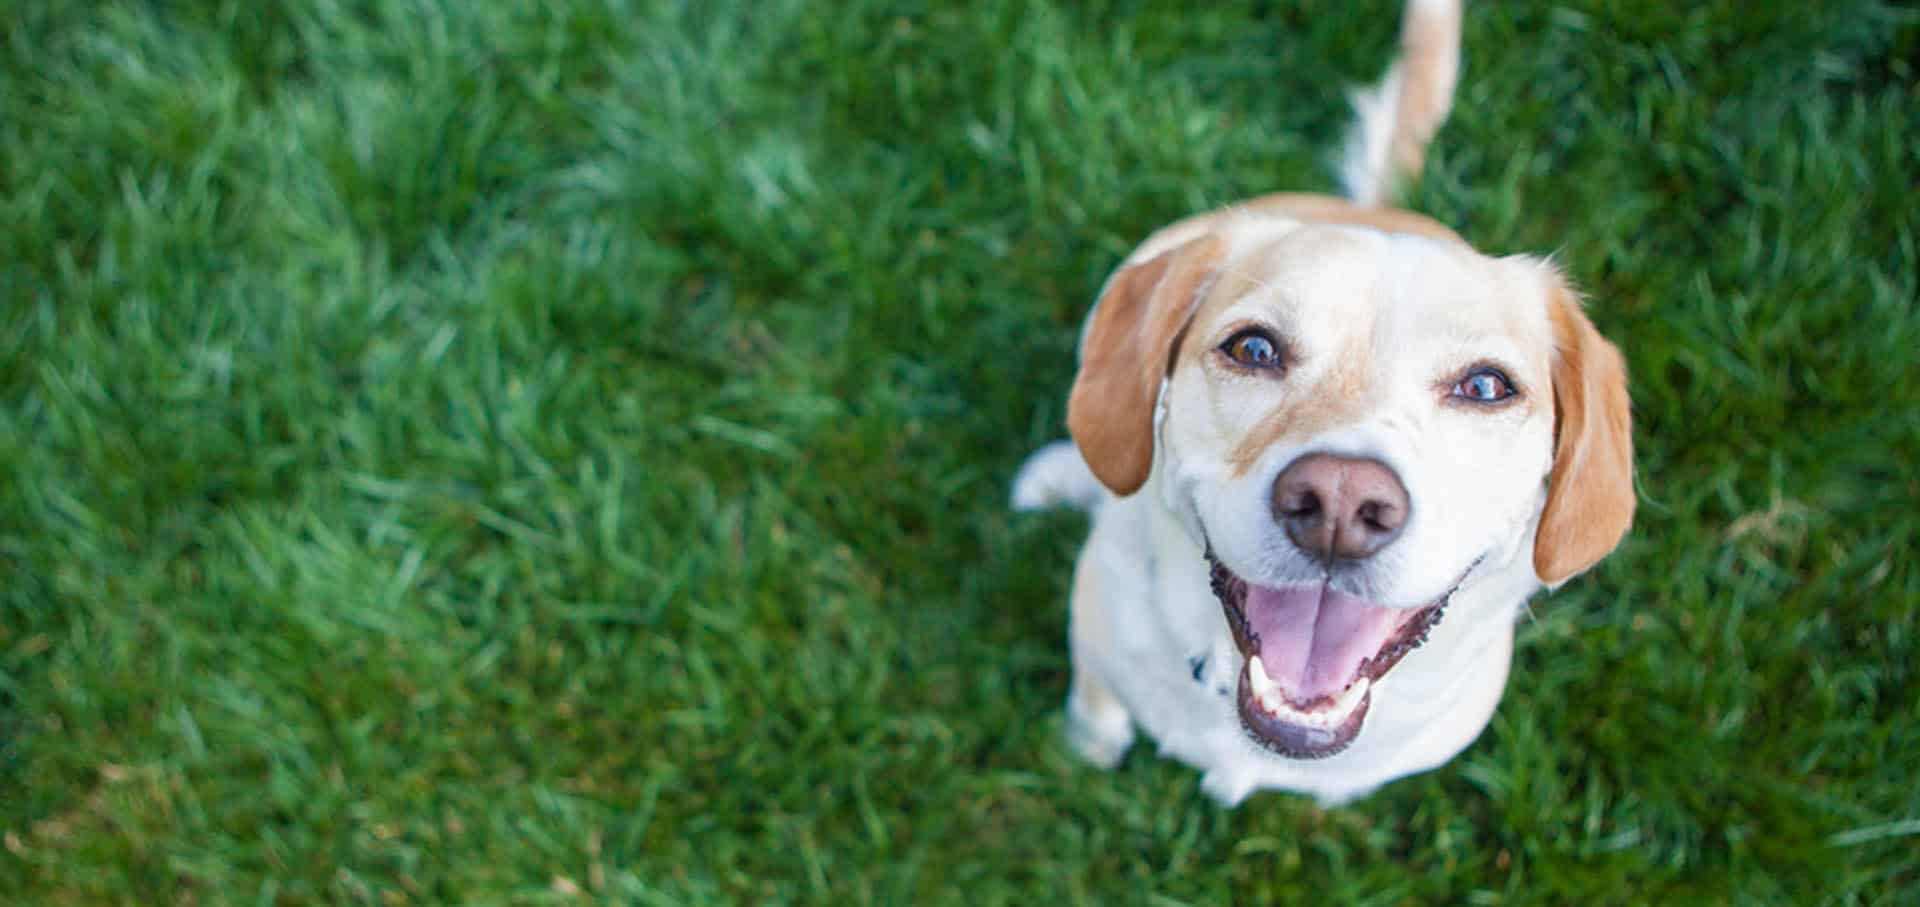 Dog playing outside with a smile — Best Veterinary Services in Bundaberg, QLD